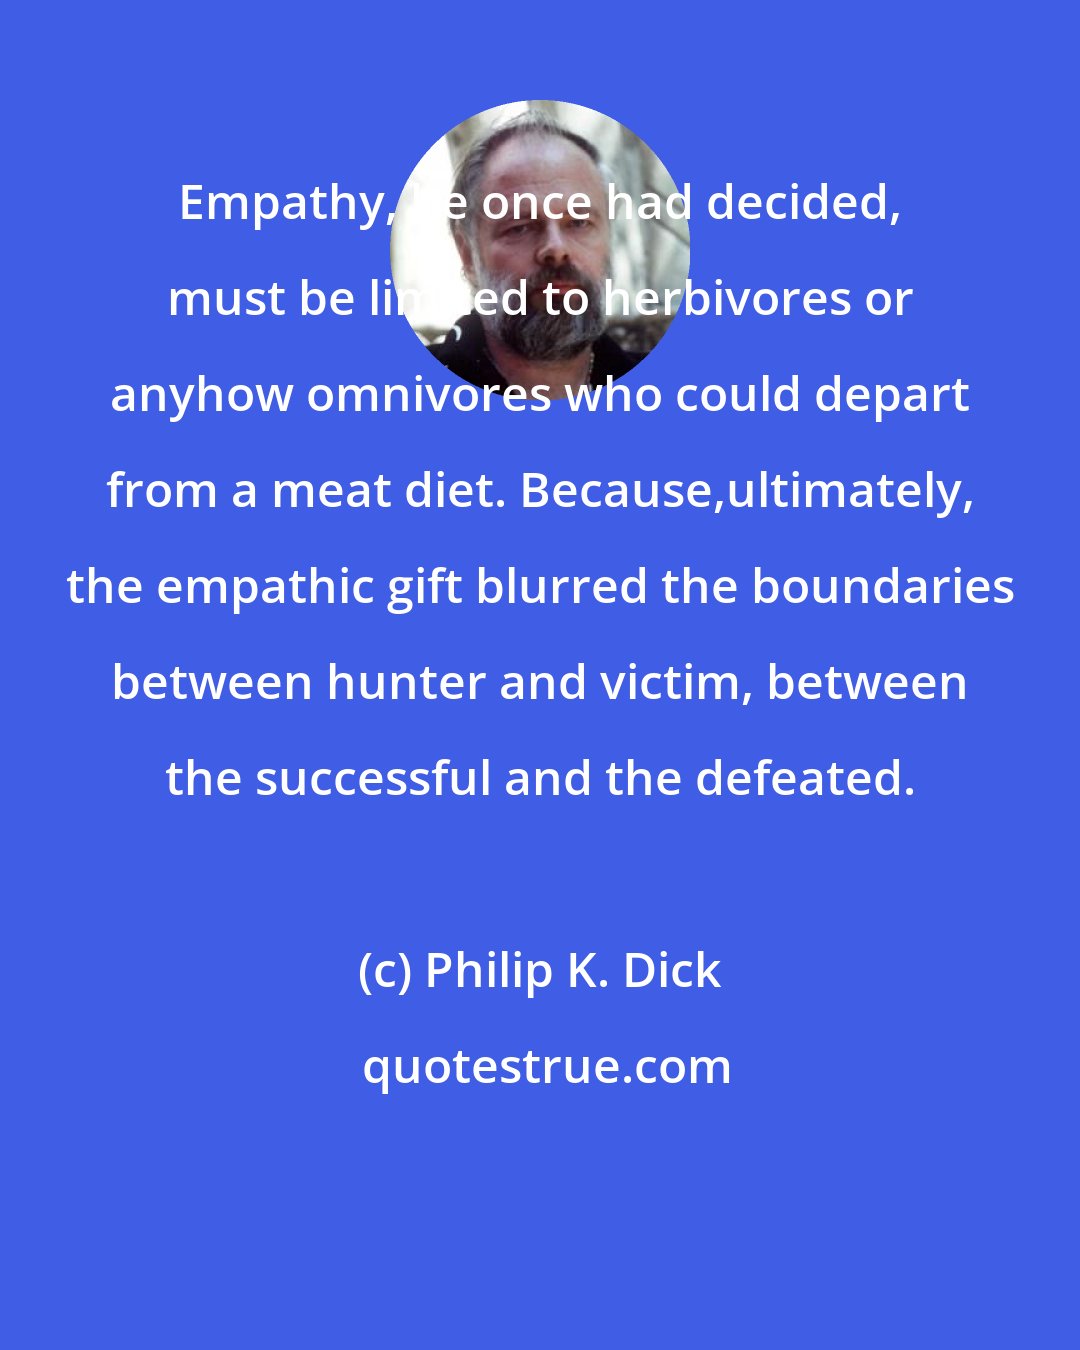 Philip K. Dick: Empathy, he once had decided, must be limited to herbivores or anyhow omnivores who could depart from a meat diet. Because,ultimately, the empathic gift blurred the boundaries between hunter and victim, between the successful and the defeated.